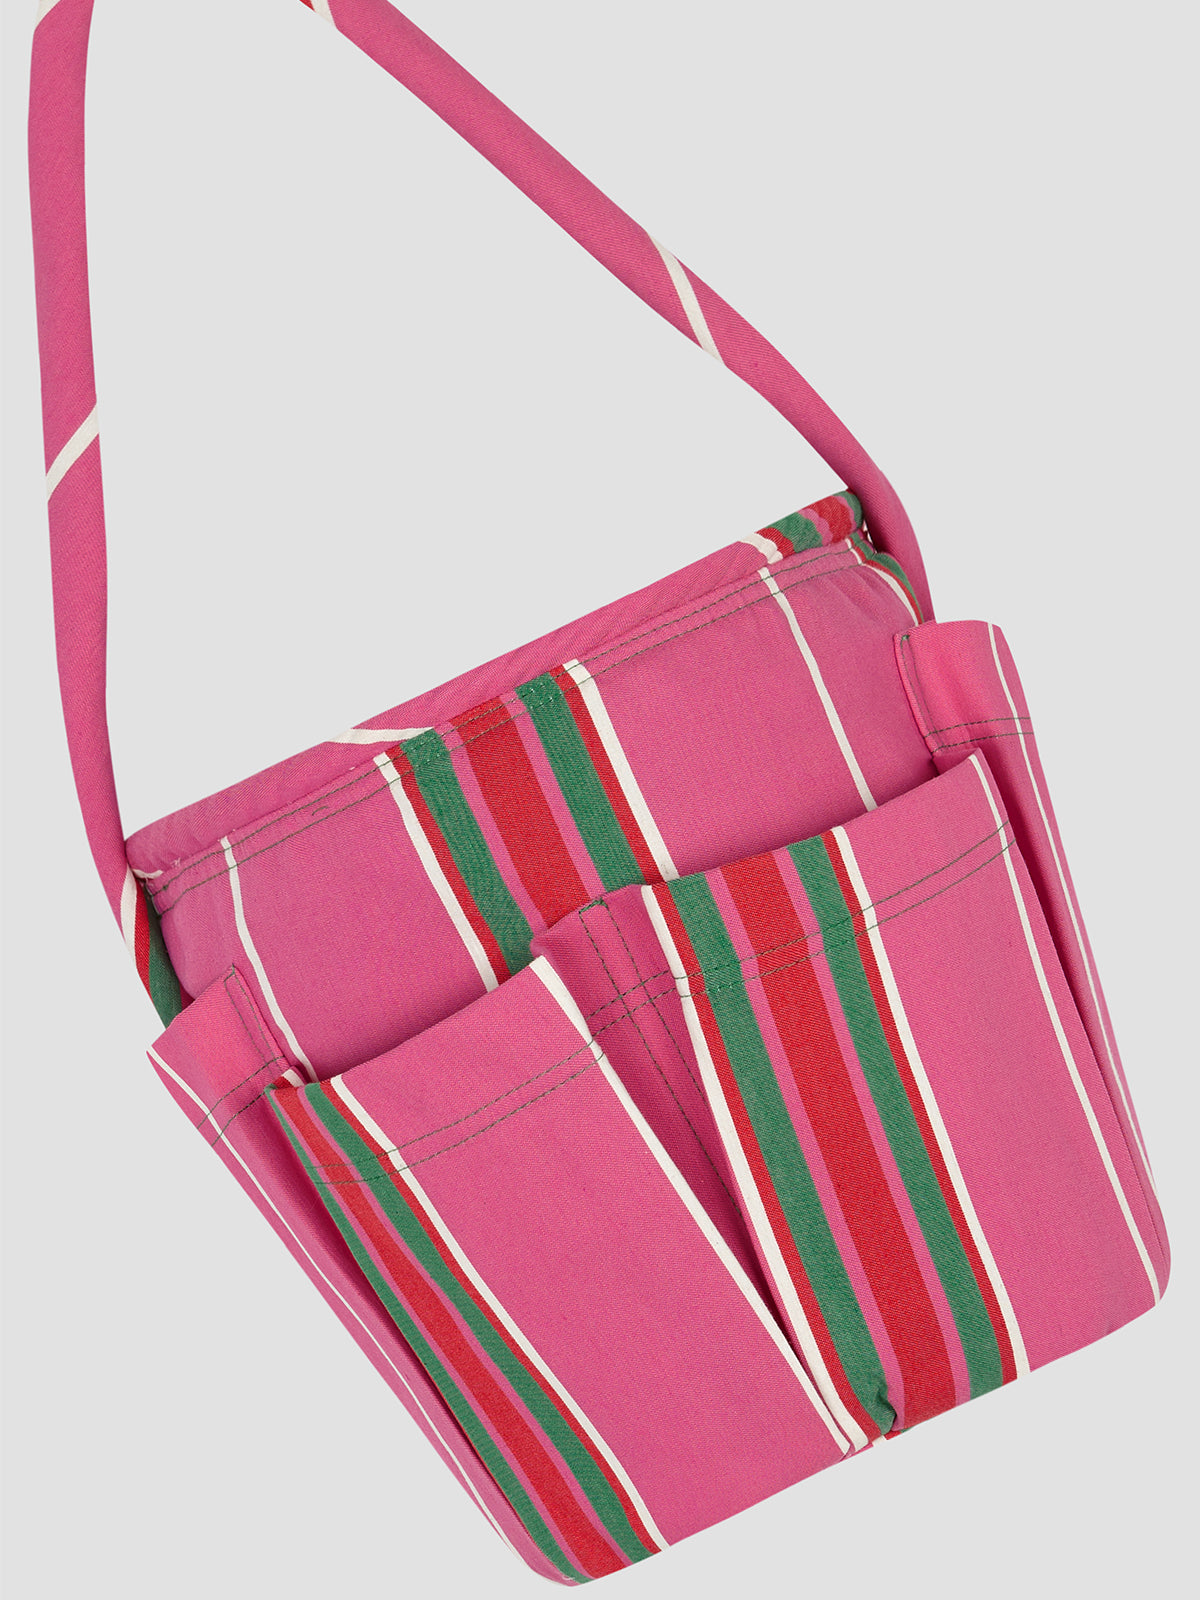 Round base bag in our iconic fuchsia Pippi fabric. It features a medium short handle and external pockets. 